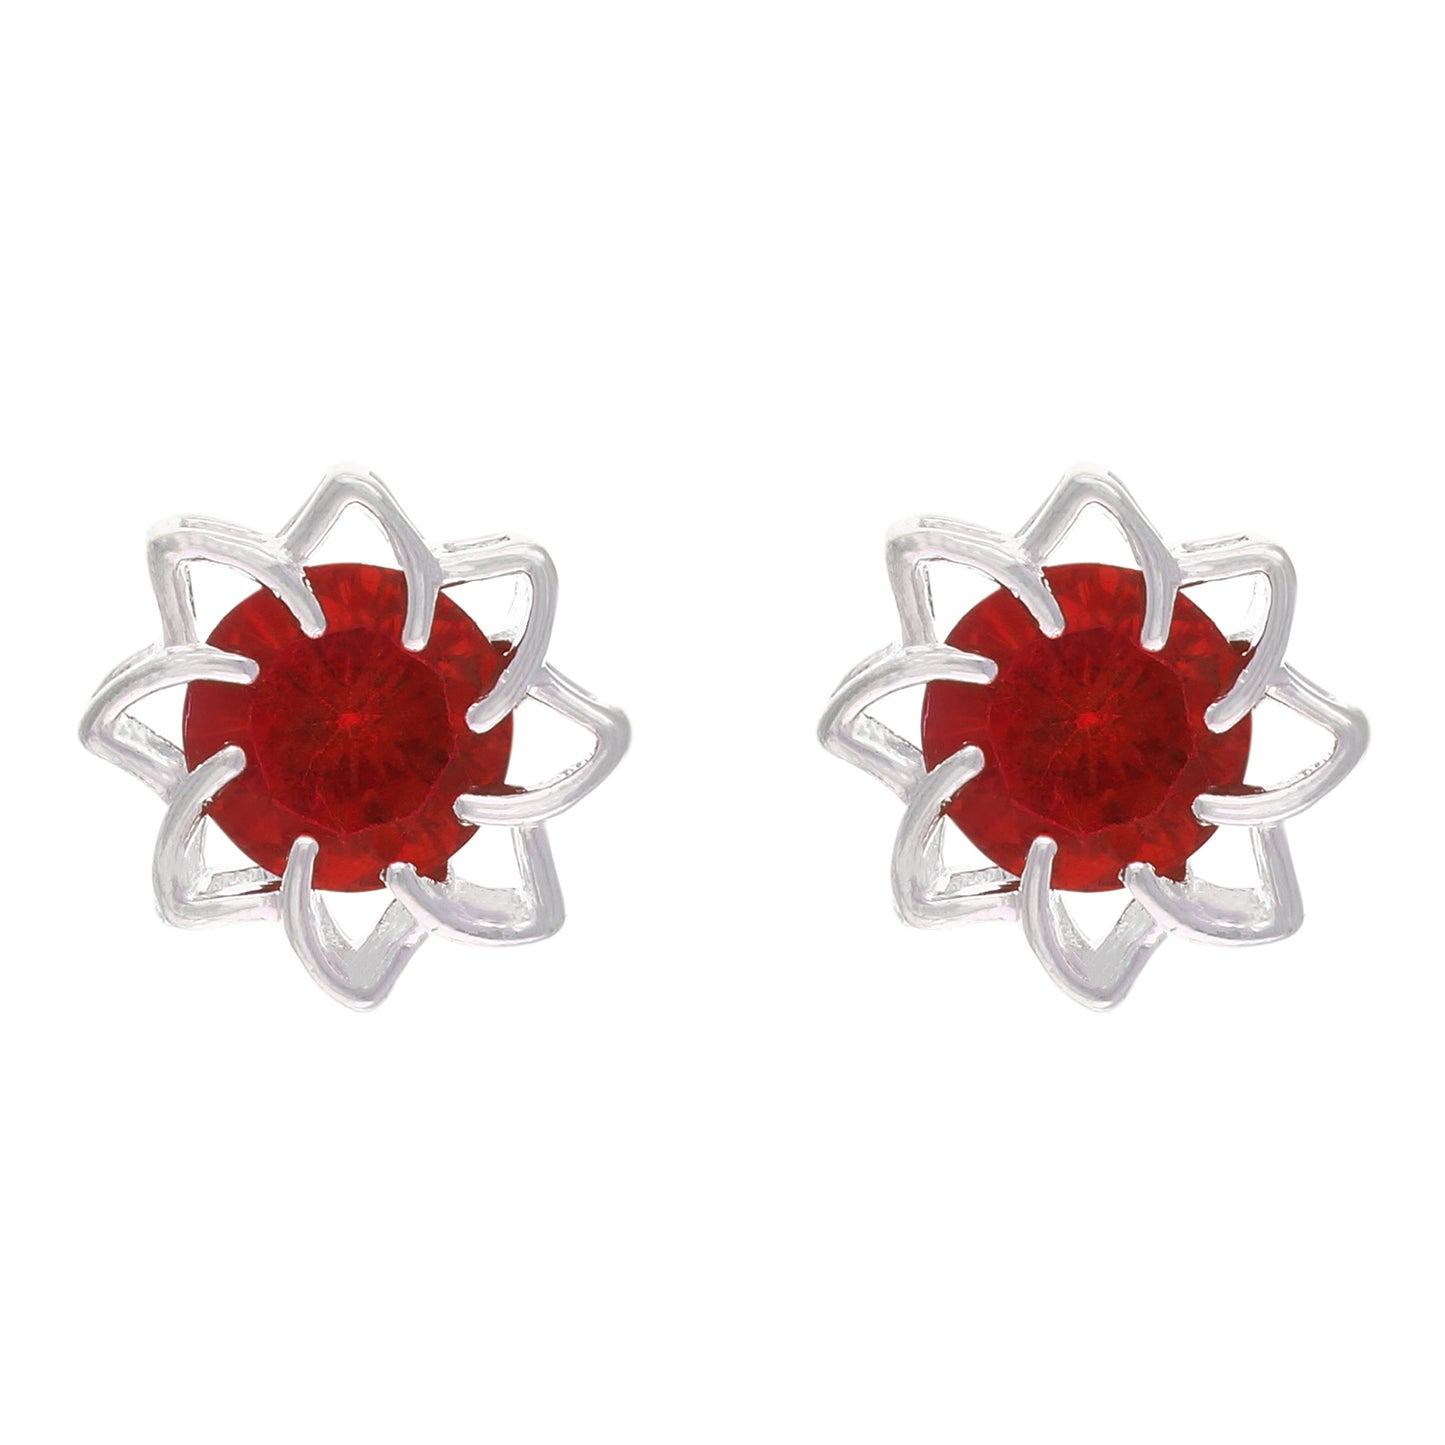 Purple colour Floral Design  Stud Earrings for Girls and Women